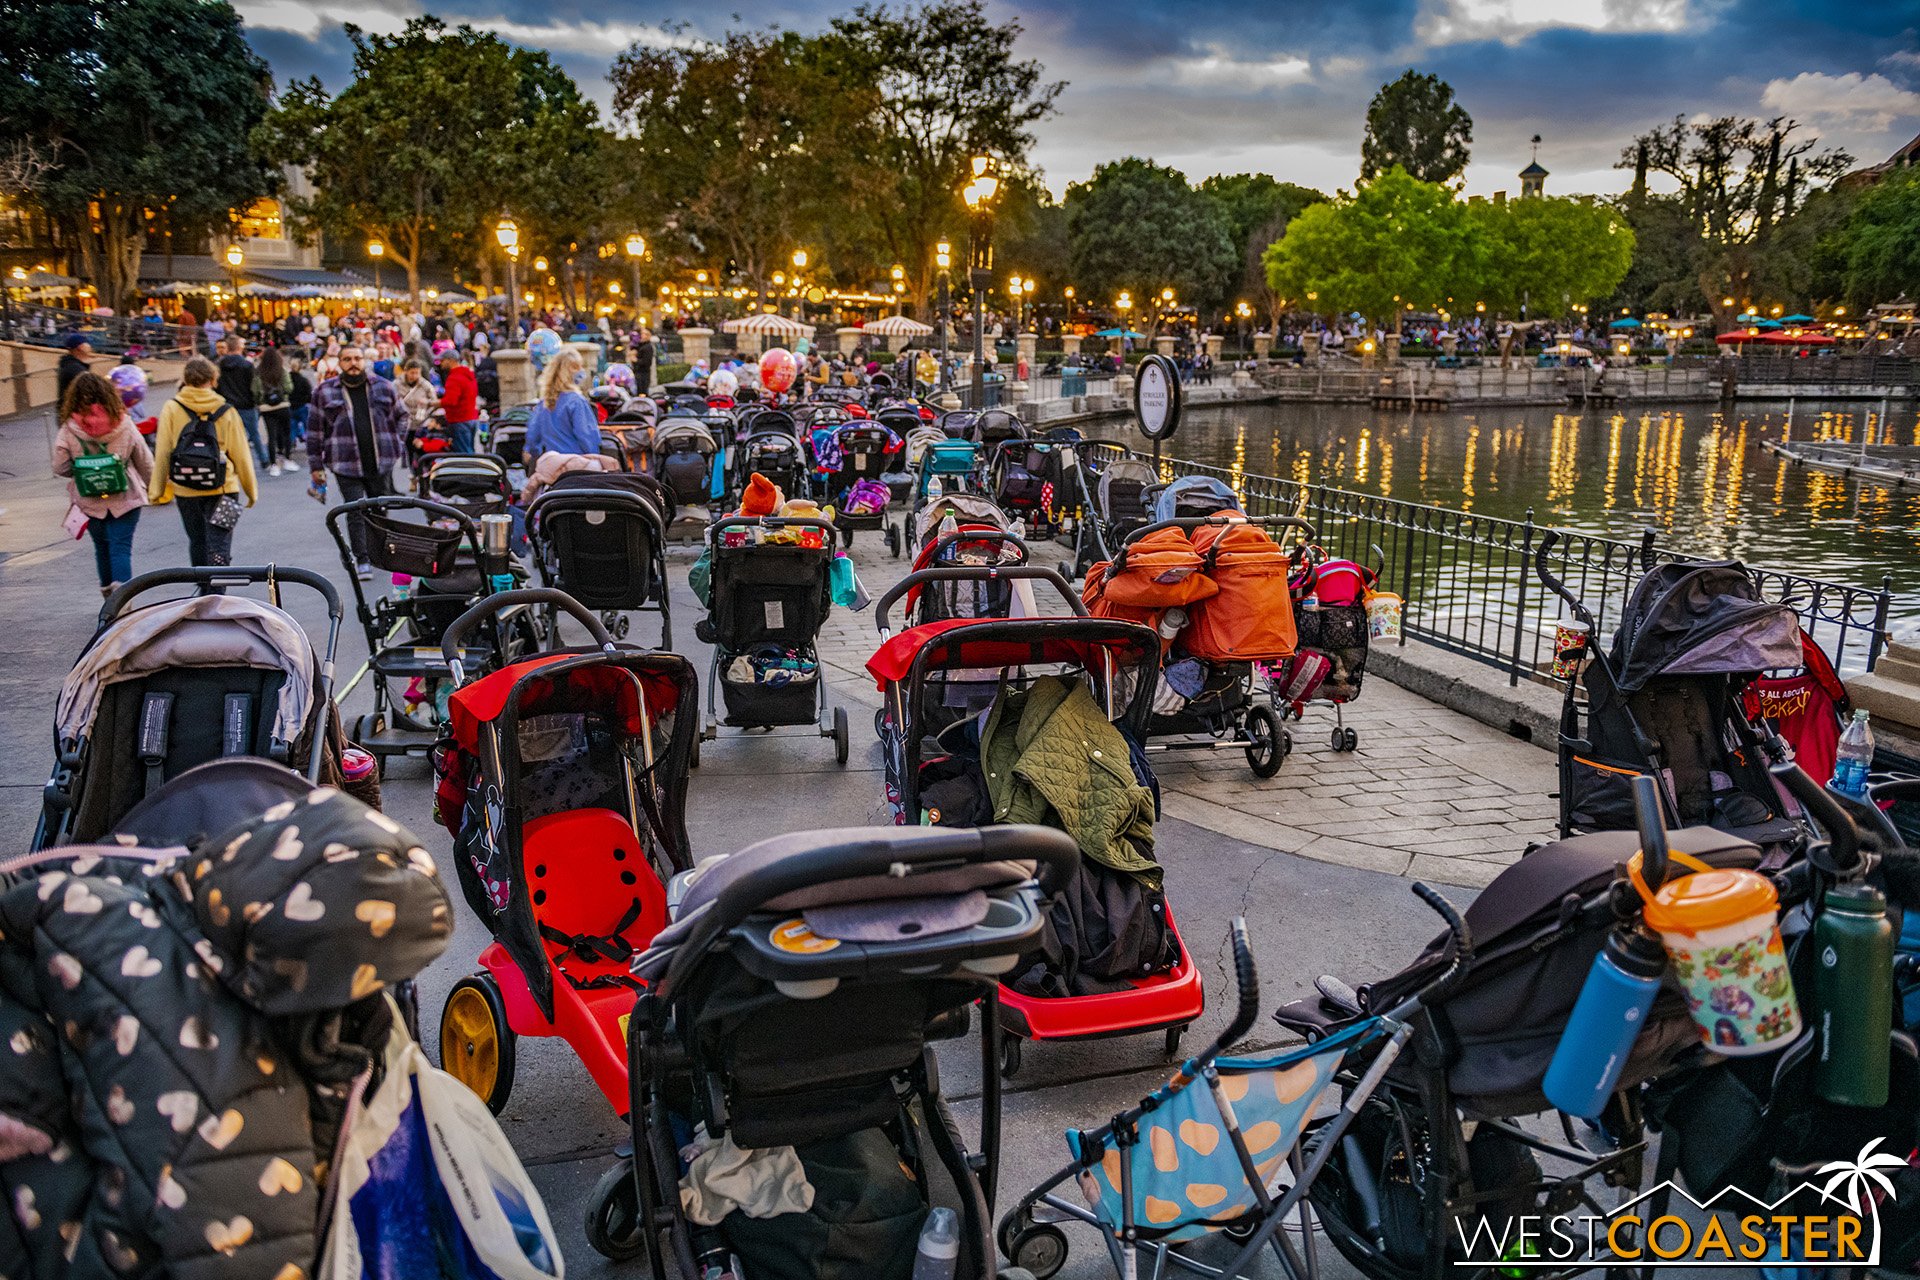  NOW IF ONLY THEY CAN DO SOMETHING ABOUT THIS CRAZY STROLLER PROBLEM THAT IS A BLIGHT UPON THE RIVERS OF AMERICA BECAUSE THEY DIDN’T HAVE STROLLERS BACK IN THE 1800s AND THIS IS ANOTHER WAY MODERN DAY DISNEY IS SPITTING ON WALT DISNEY’S LEGACY AND we